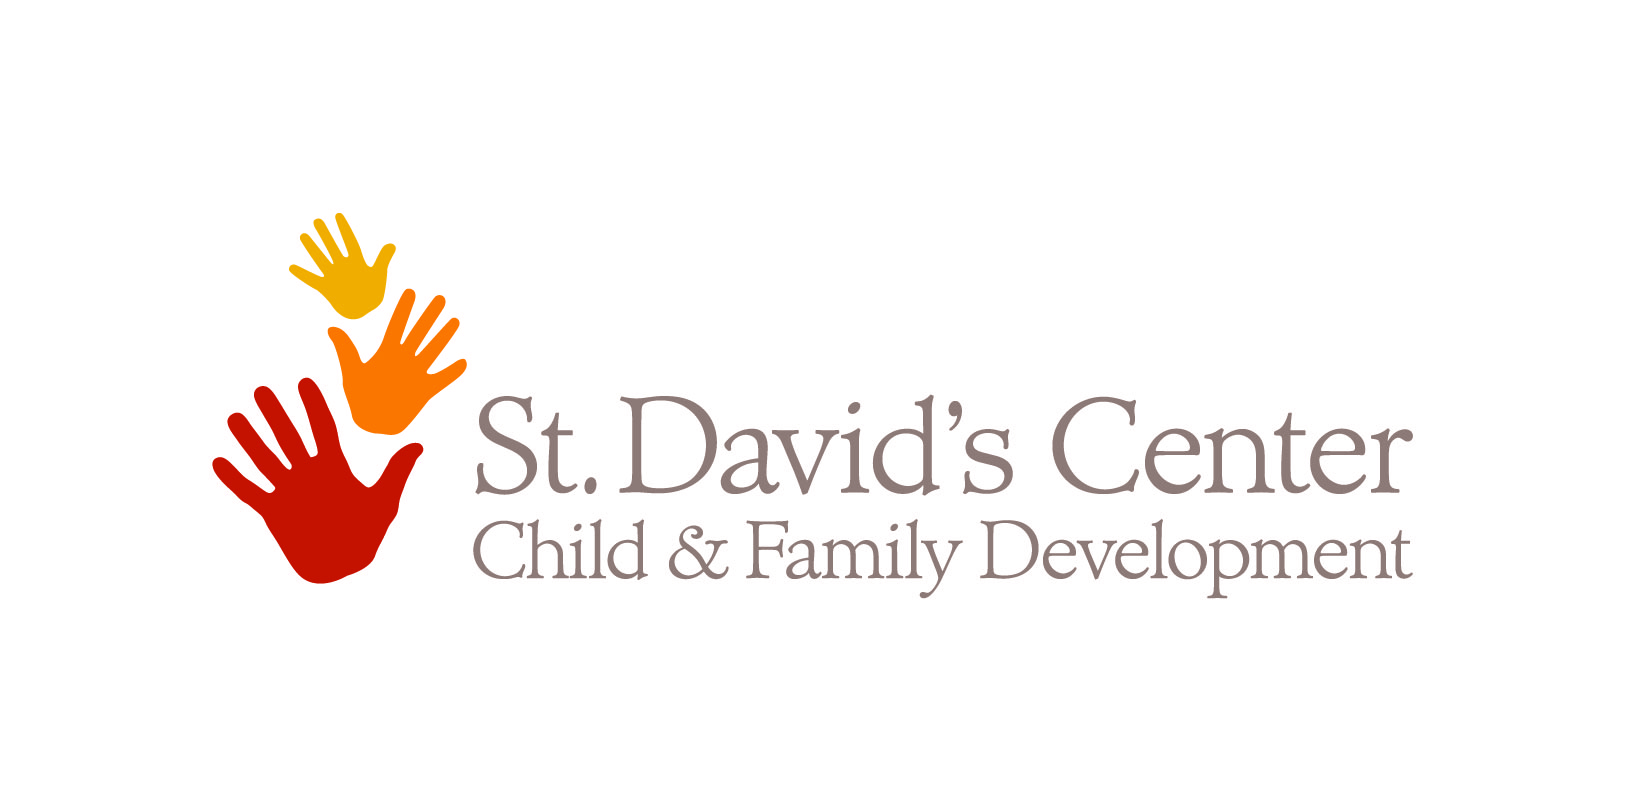 Harman Center for Child & Family Wellbeing